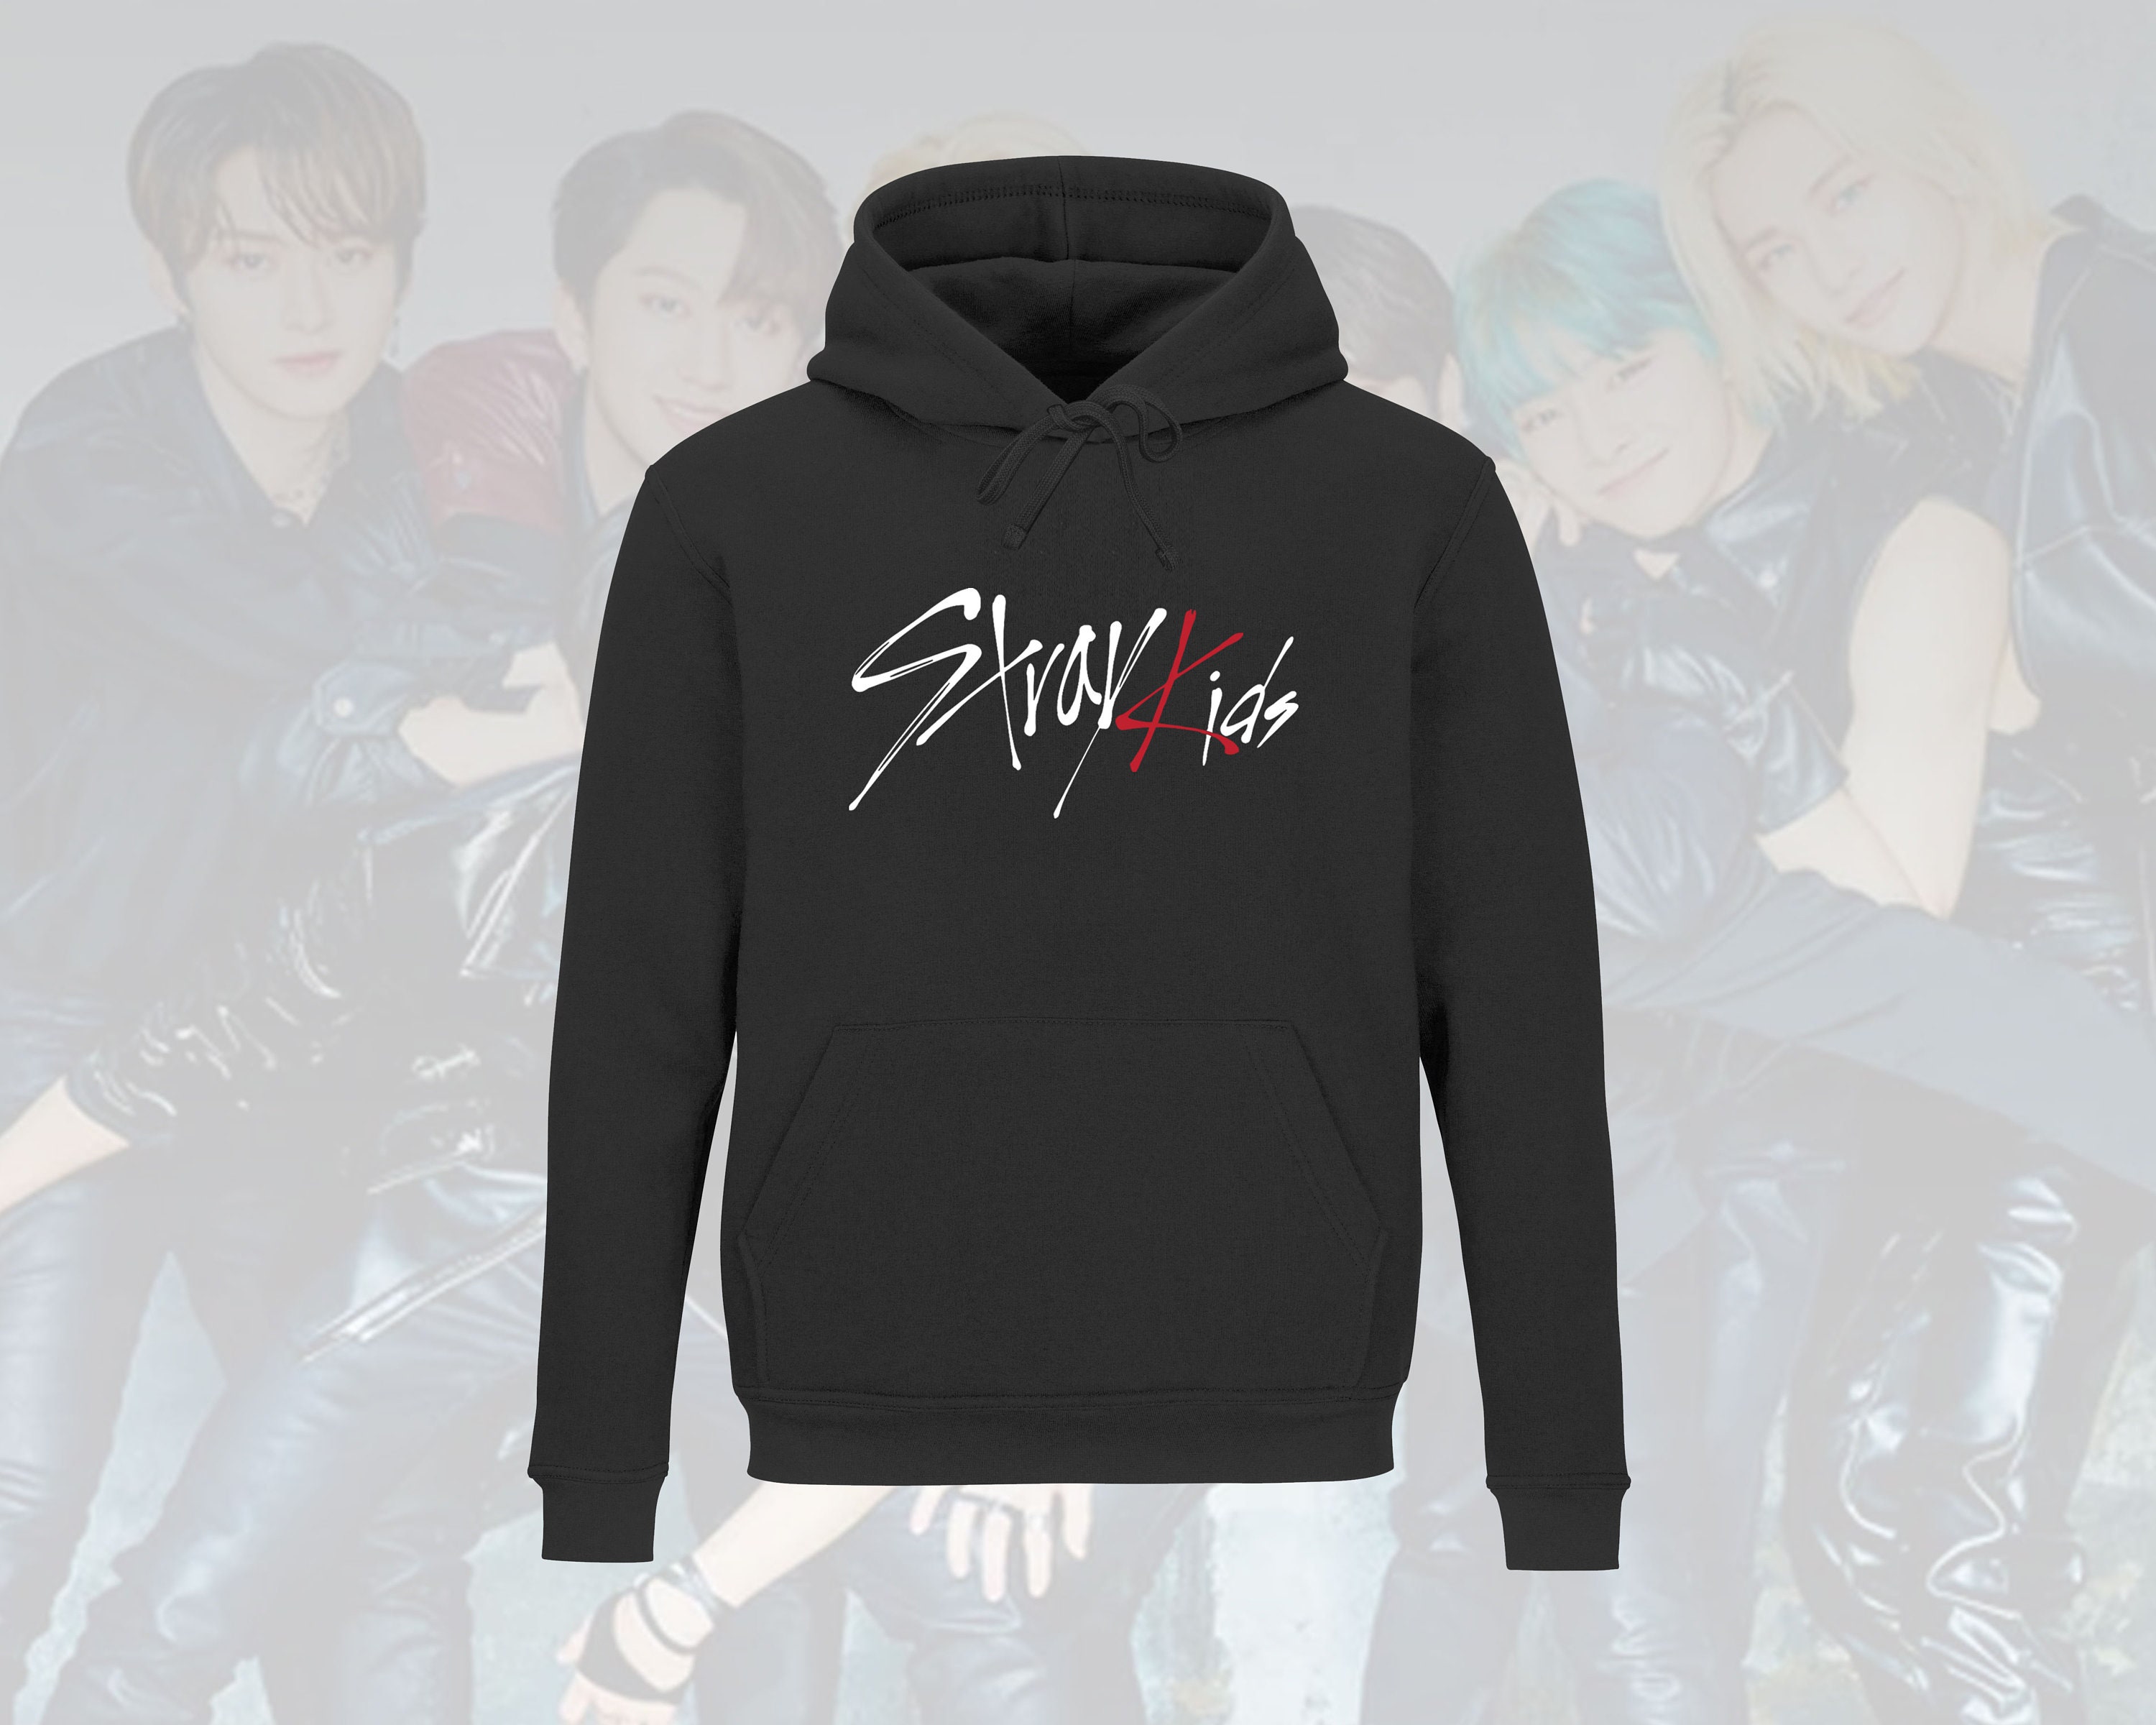 Stray Kids Pullover Stylish Hooded Sweatshirt 3D Printing Long Sleeve Tops Personalise Pullover Unisex 